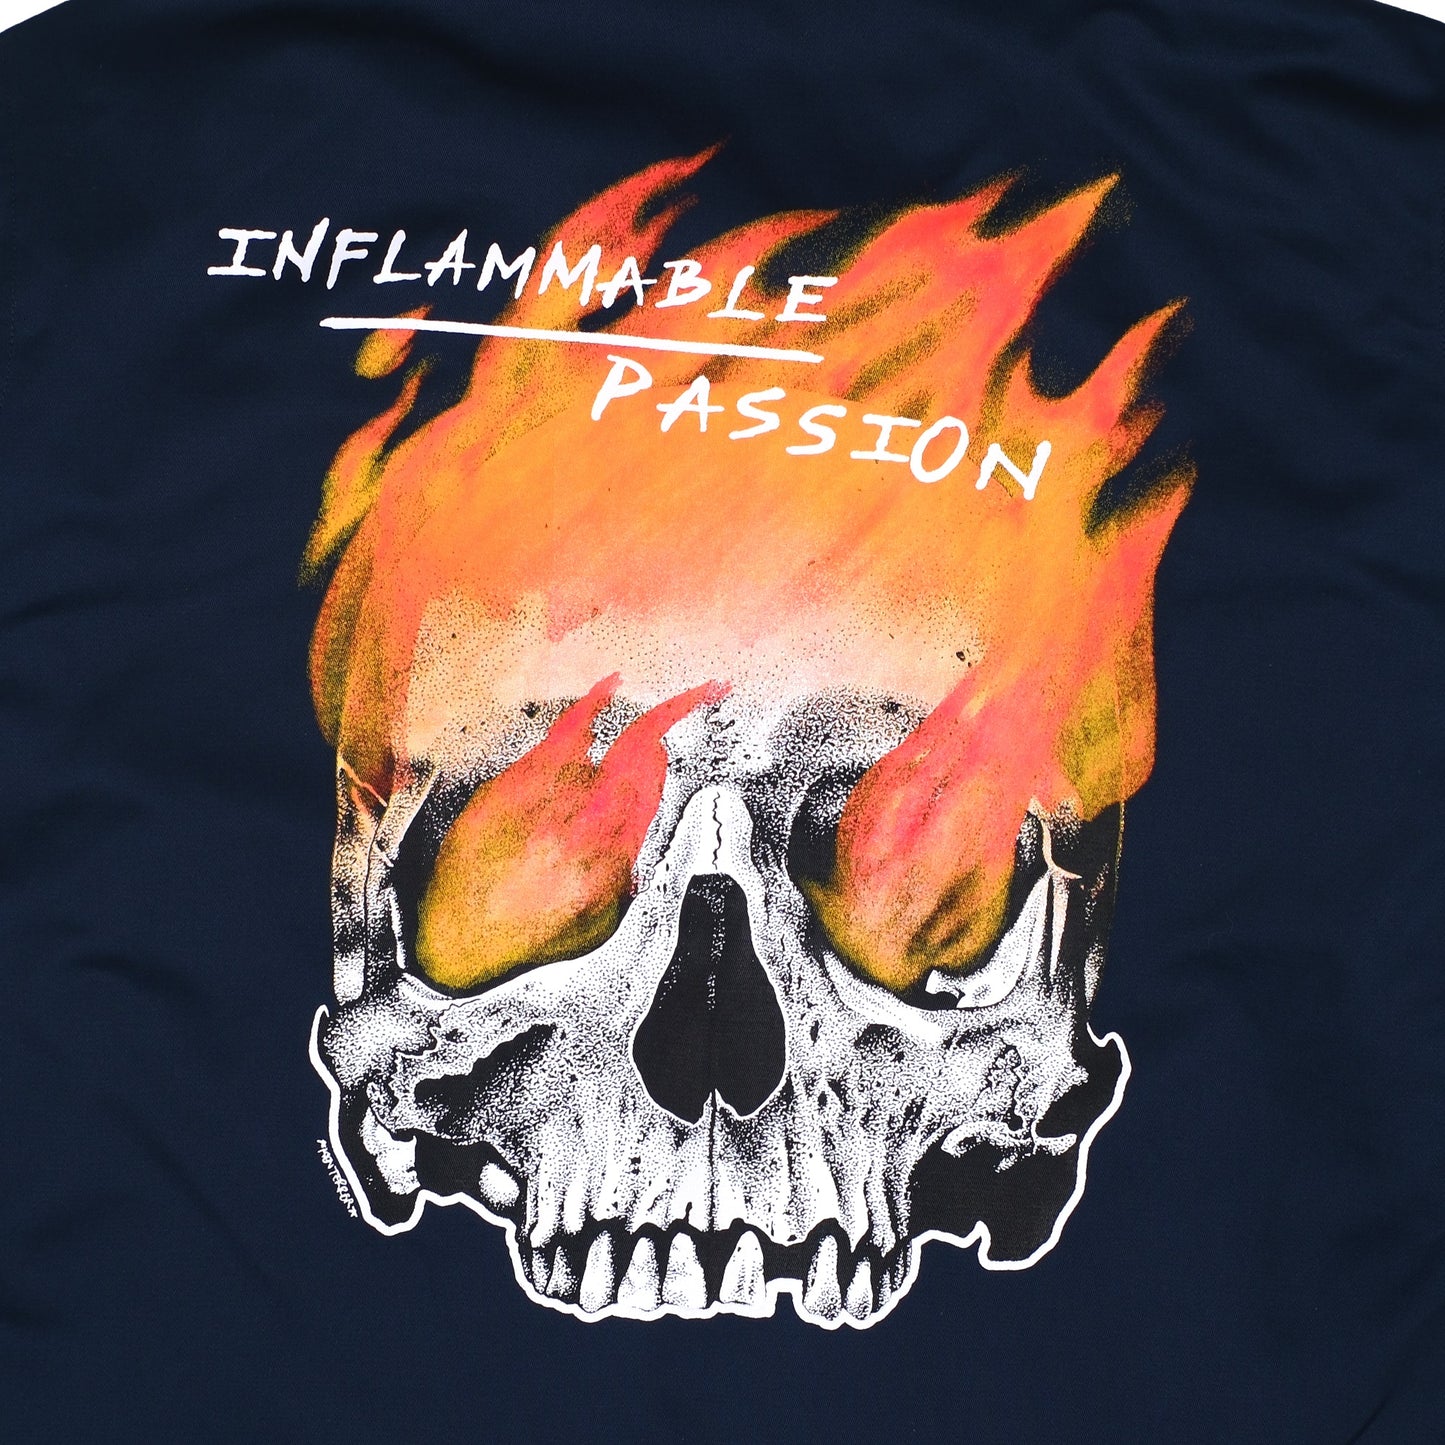 INFLAMMABLE COACH JACKET NAVY